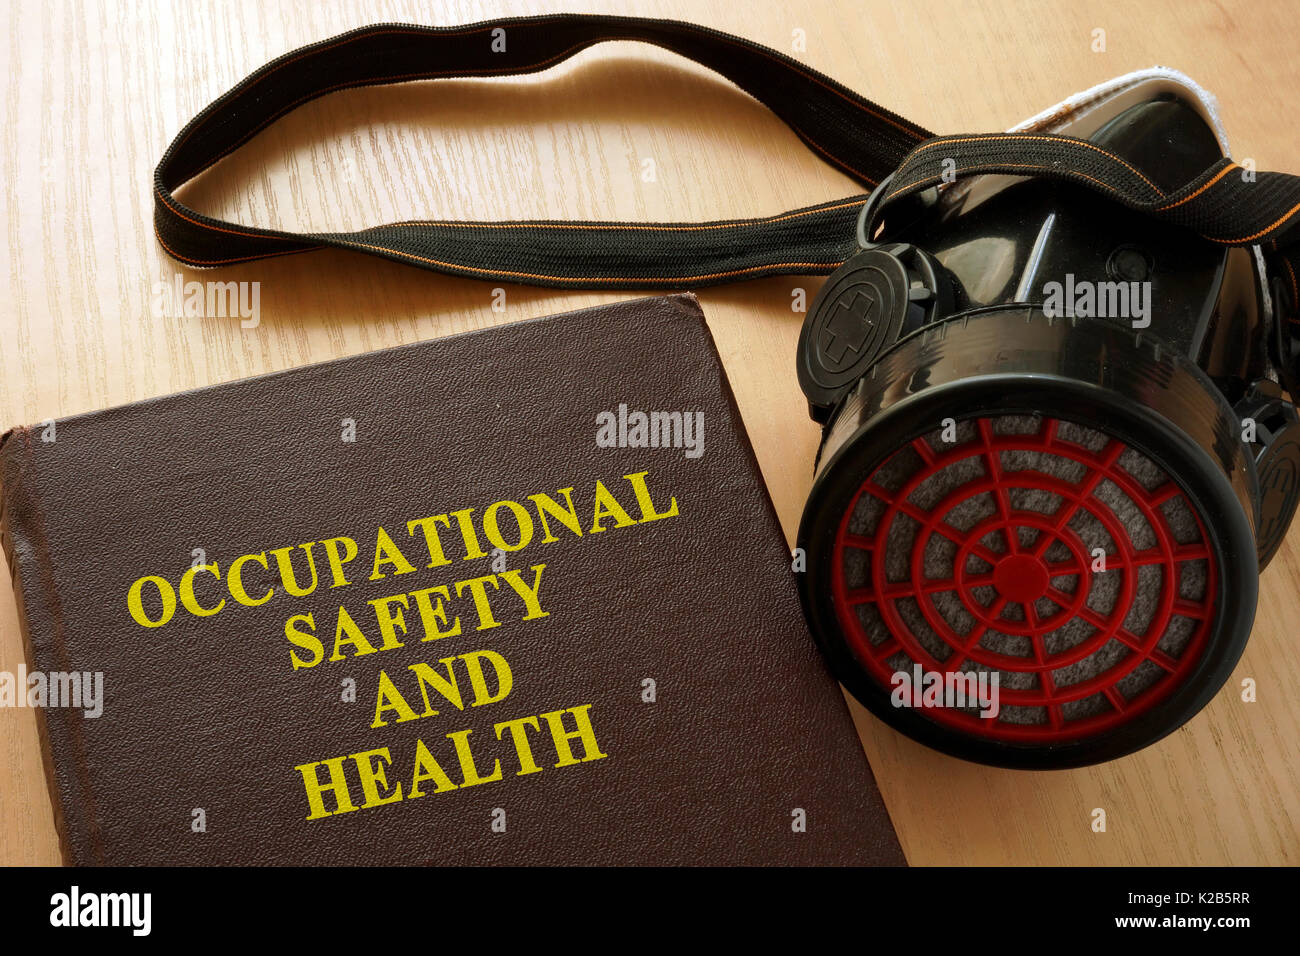 Book with title Occupational safety and health (OSH). Stock Photo